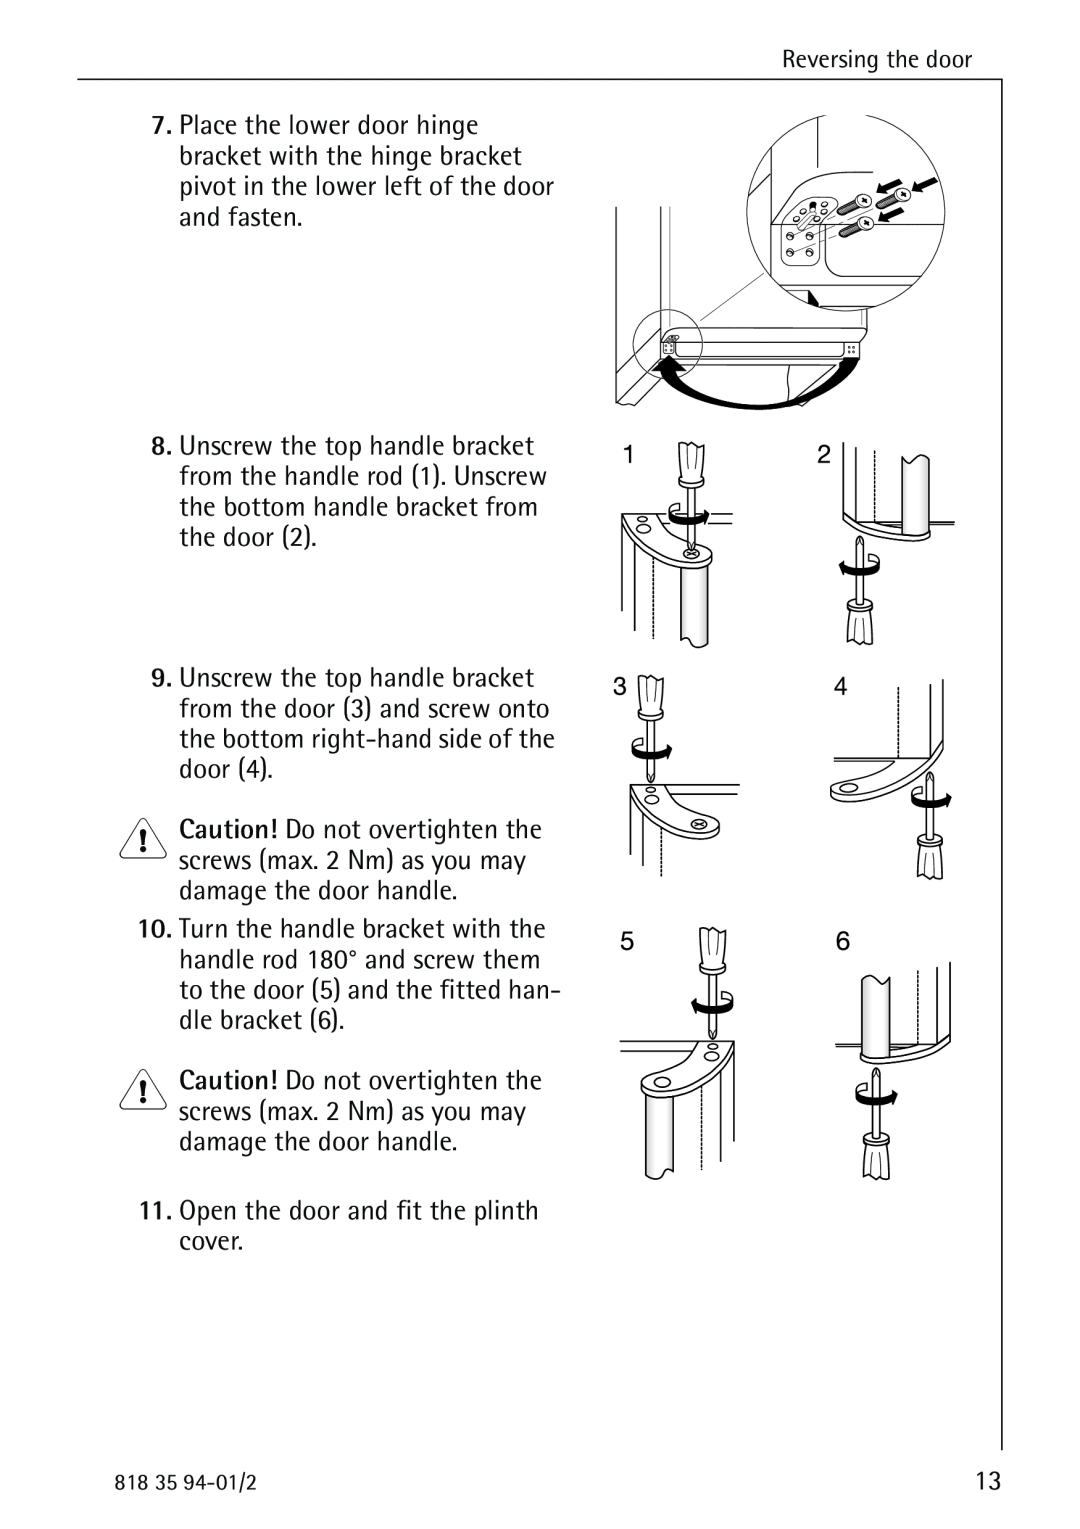 Electrolux U31462 operating instructions Open the door and fit the plinth cover 